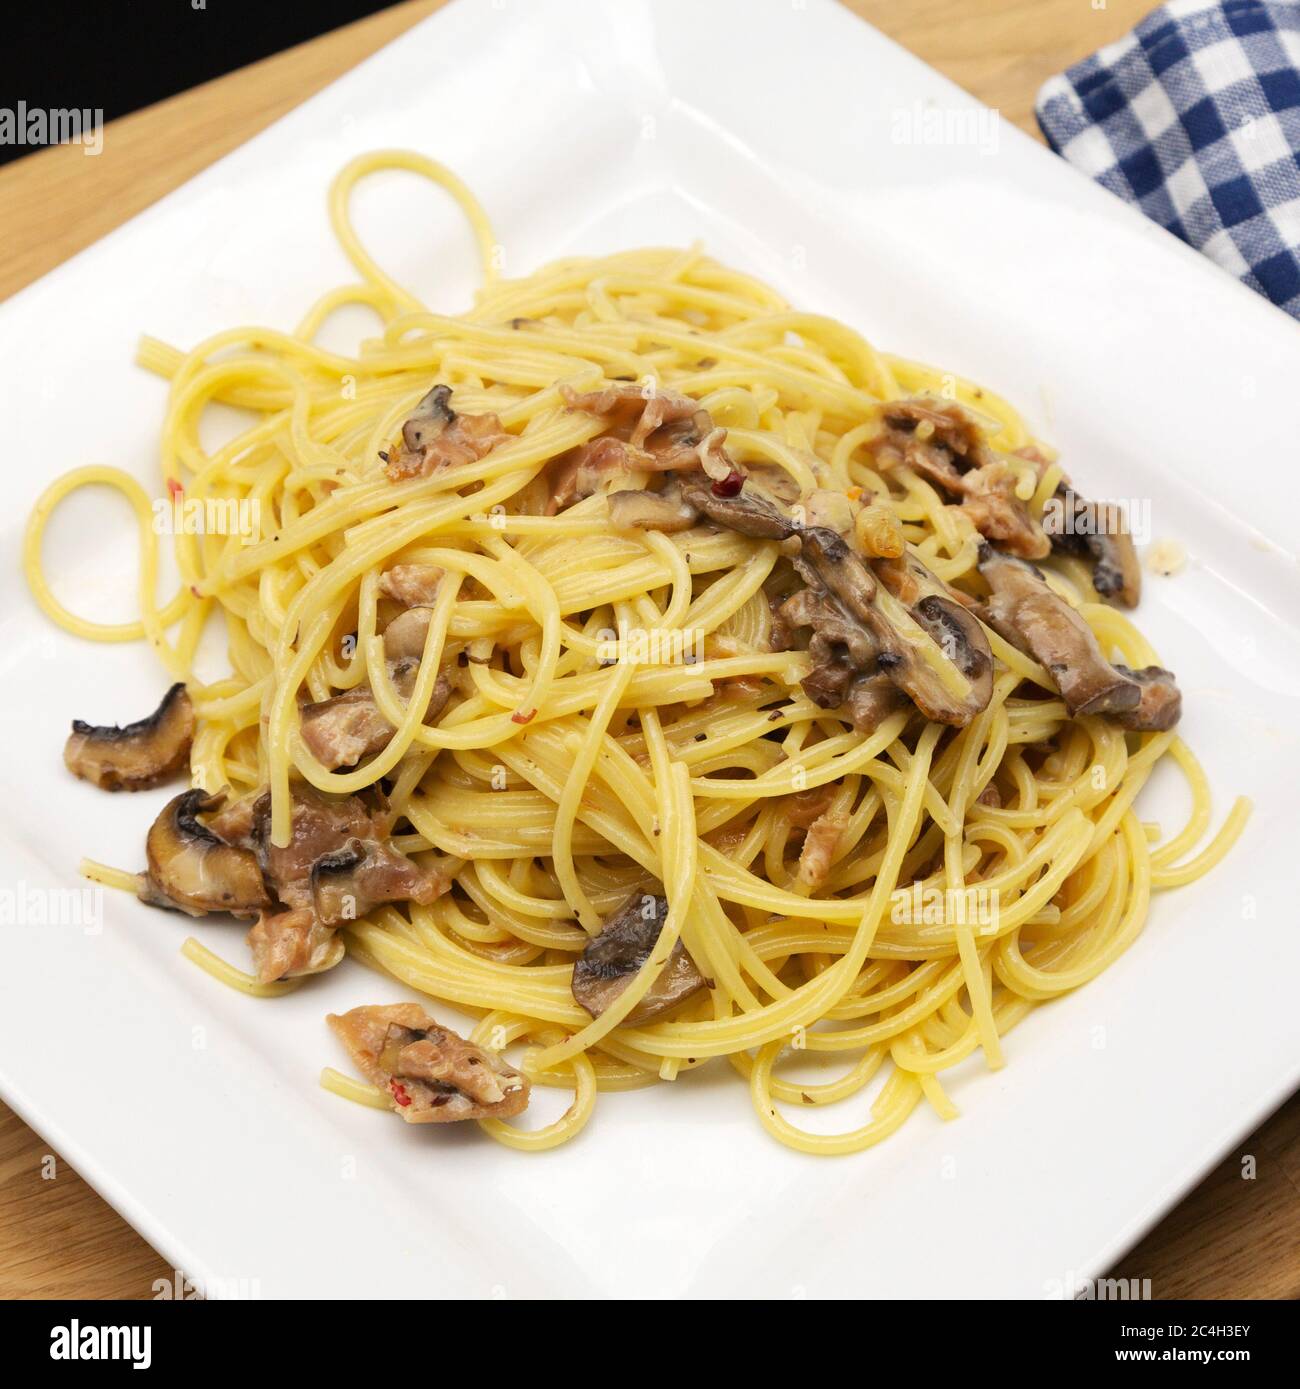 Spaghetti Carbonara, made with Parma Ham (Prosciutto di Parma) and mushrooms, presented on a wooden board. The ham is produced around the city of Parm Stock Photo